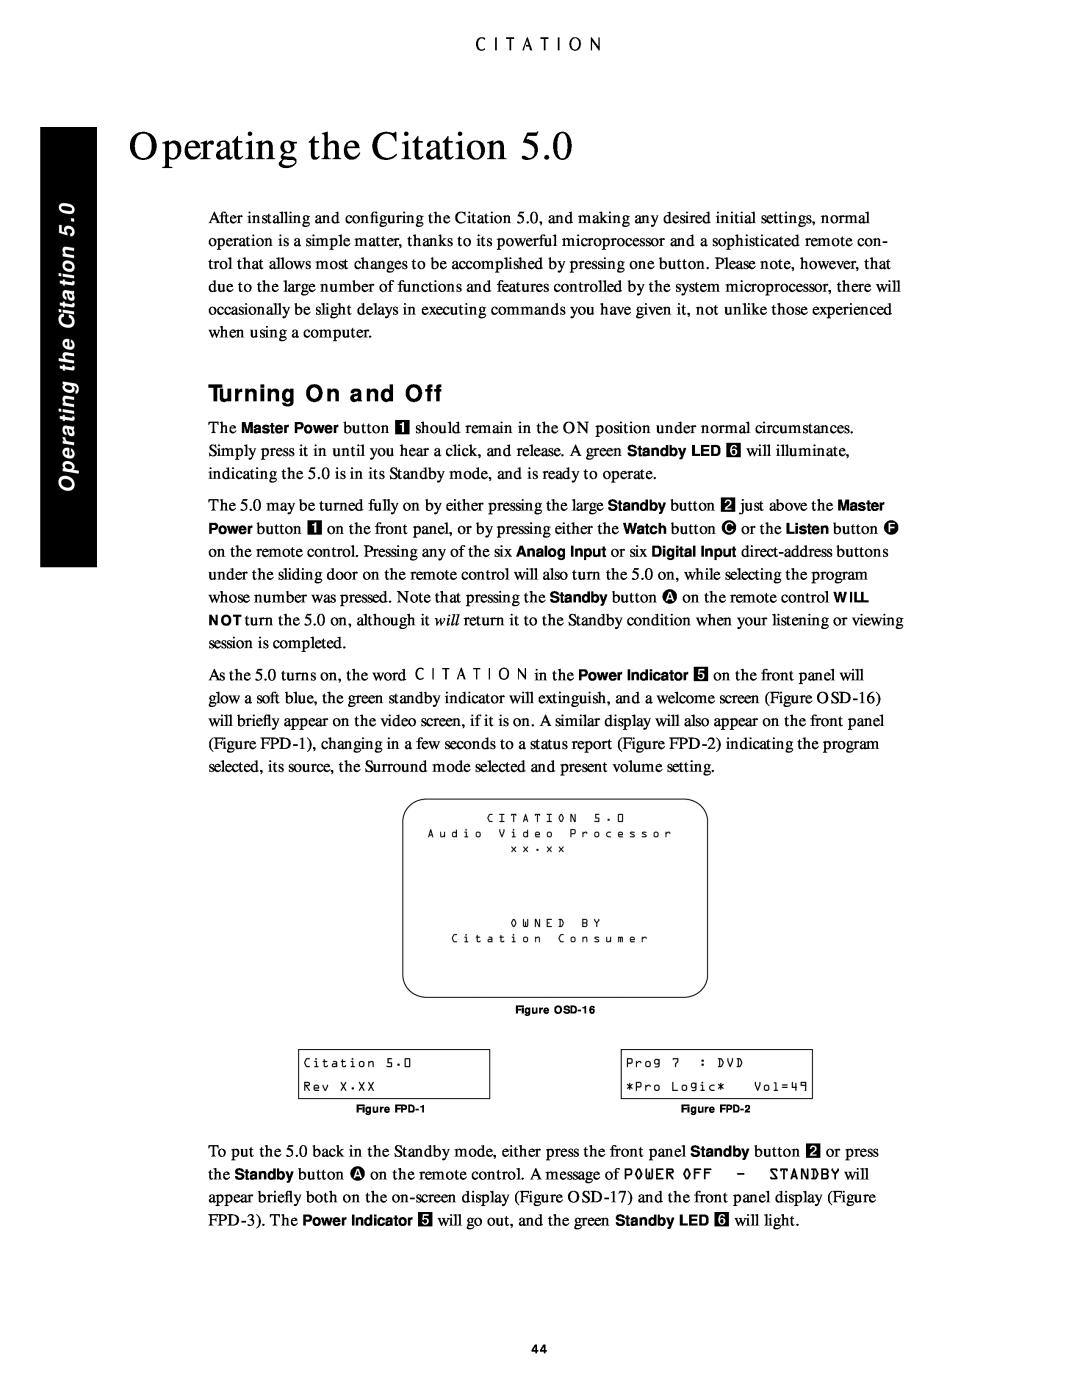 Citation Stereo Receiver owner manual Operating the Citation, Turning On and Off 